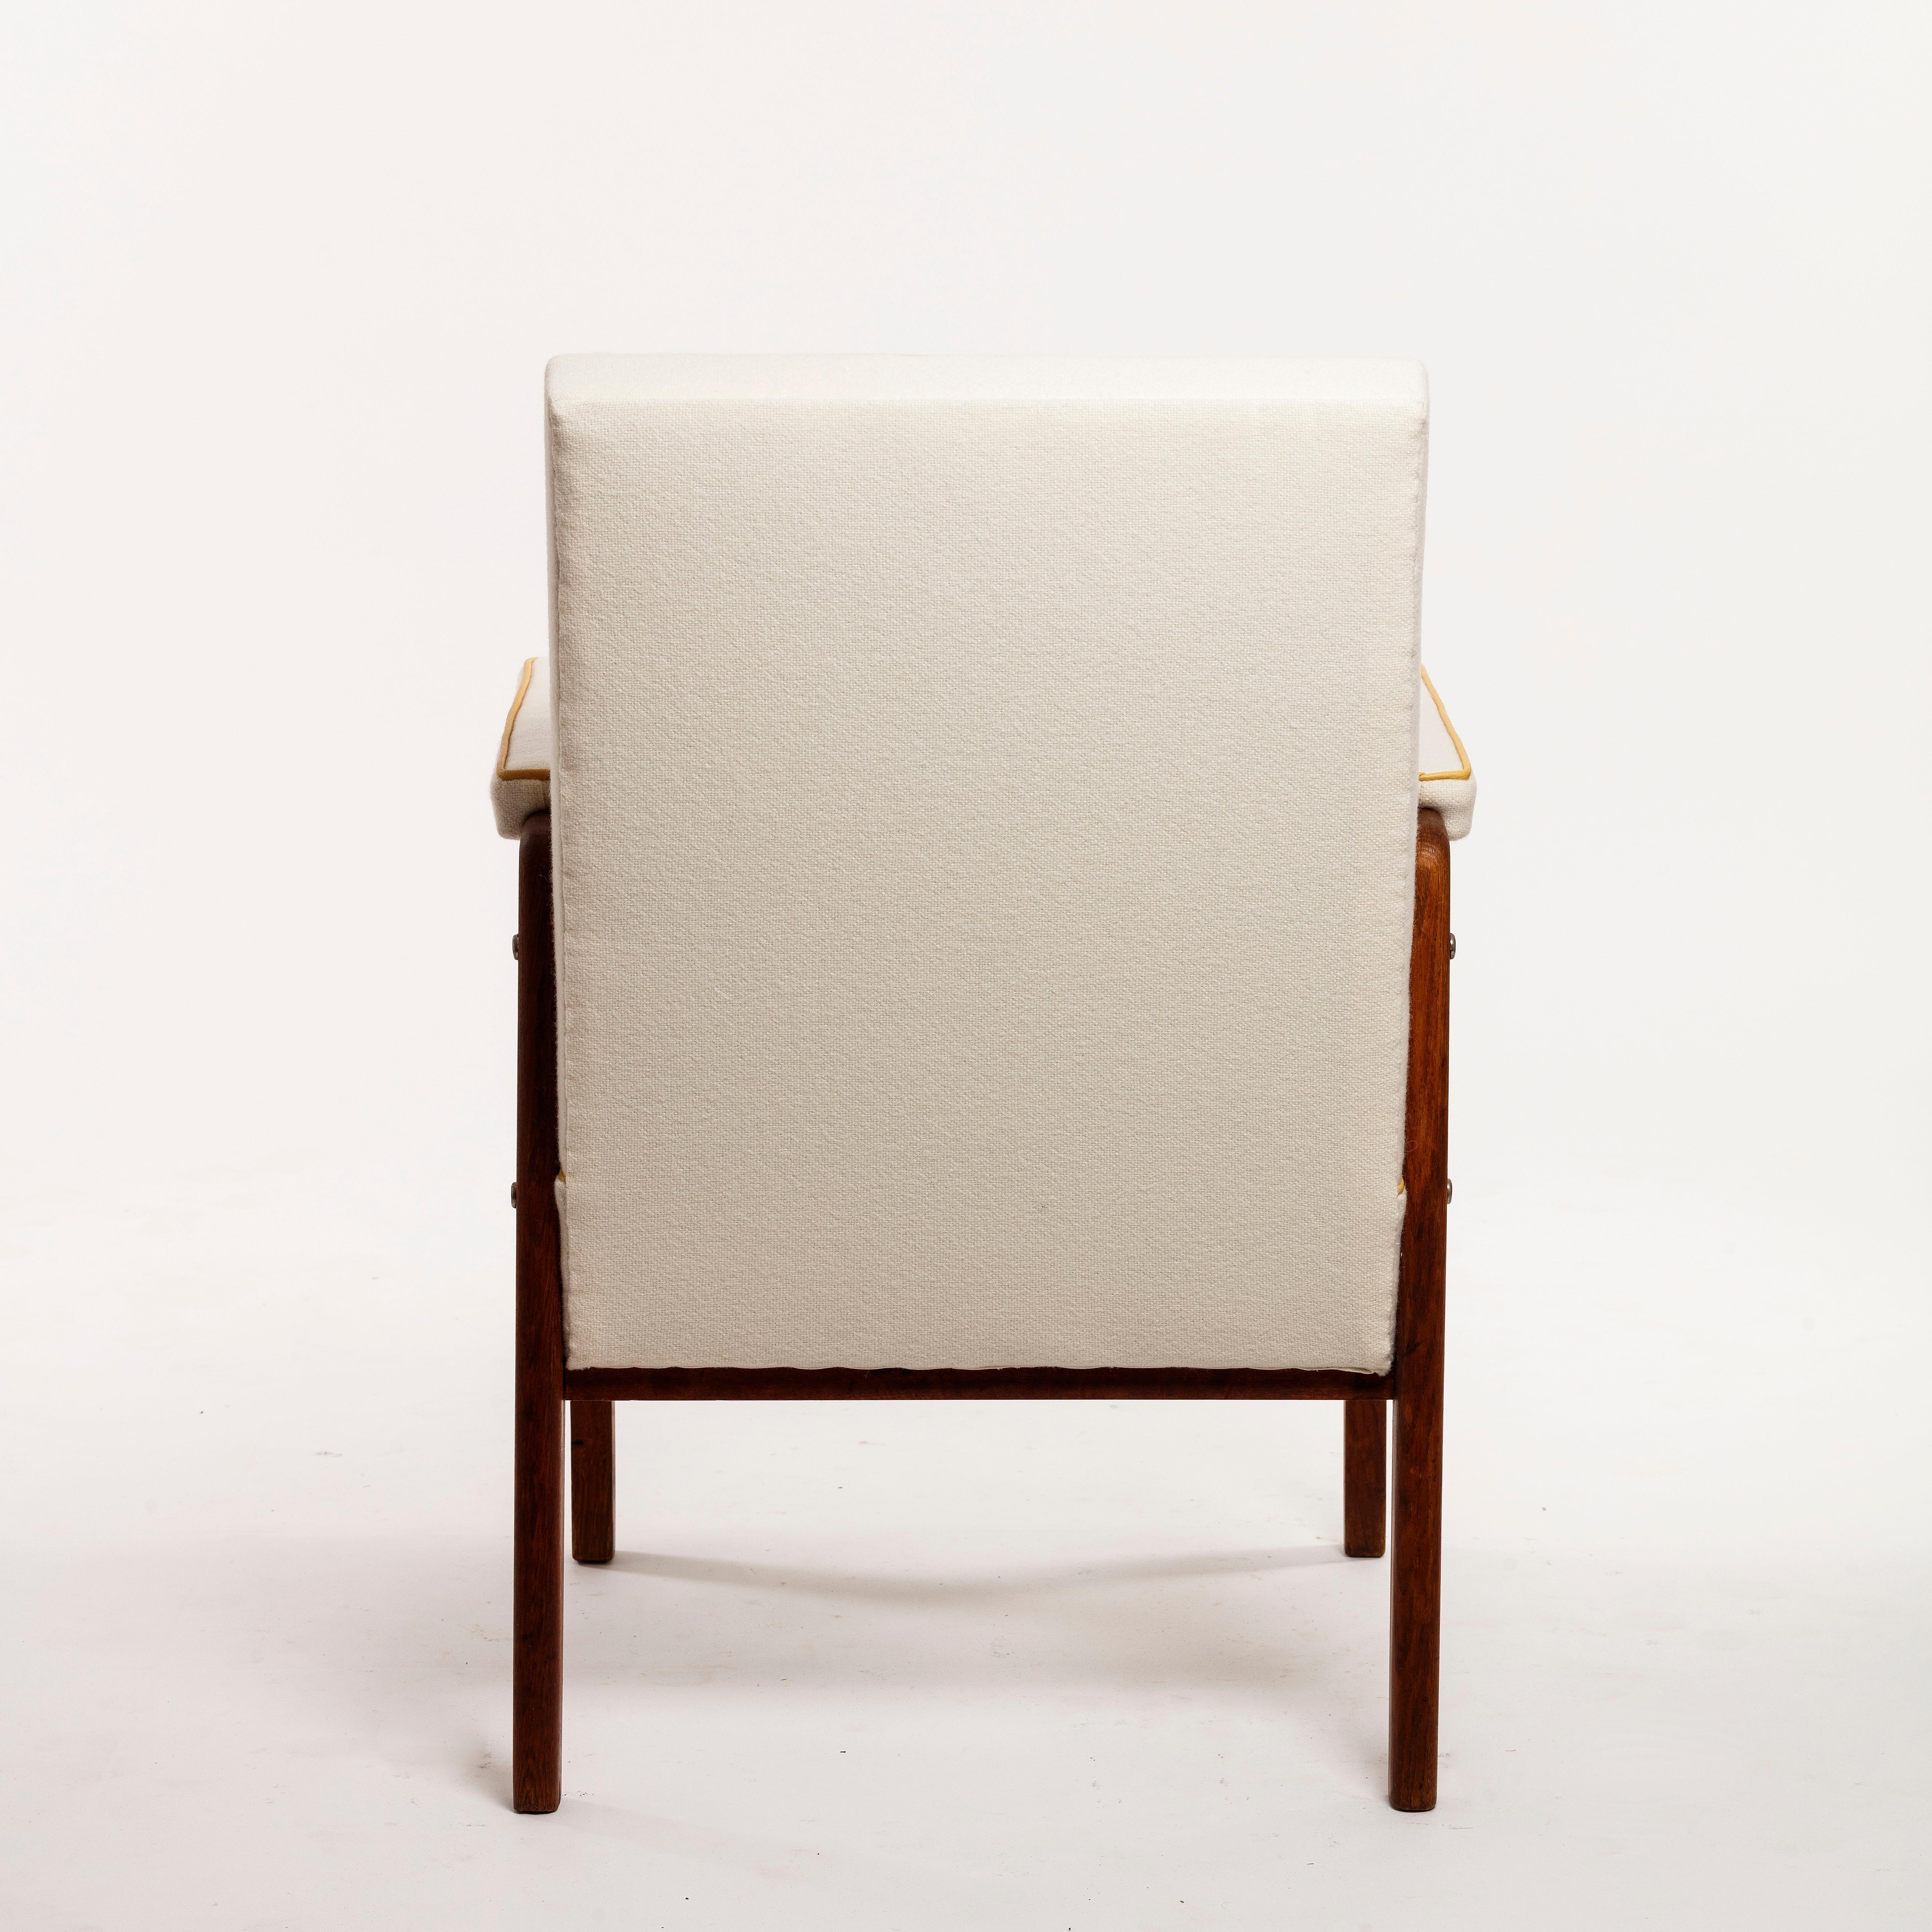 Mid-Century Modern Marcel Gascoin Armchair Created in 1950 for the Cité Universitaire Antony France For Sale